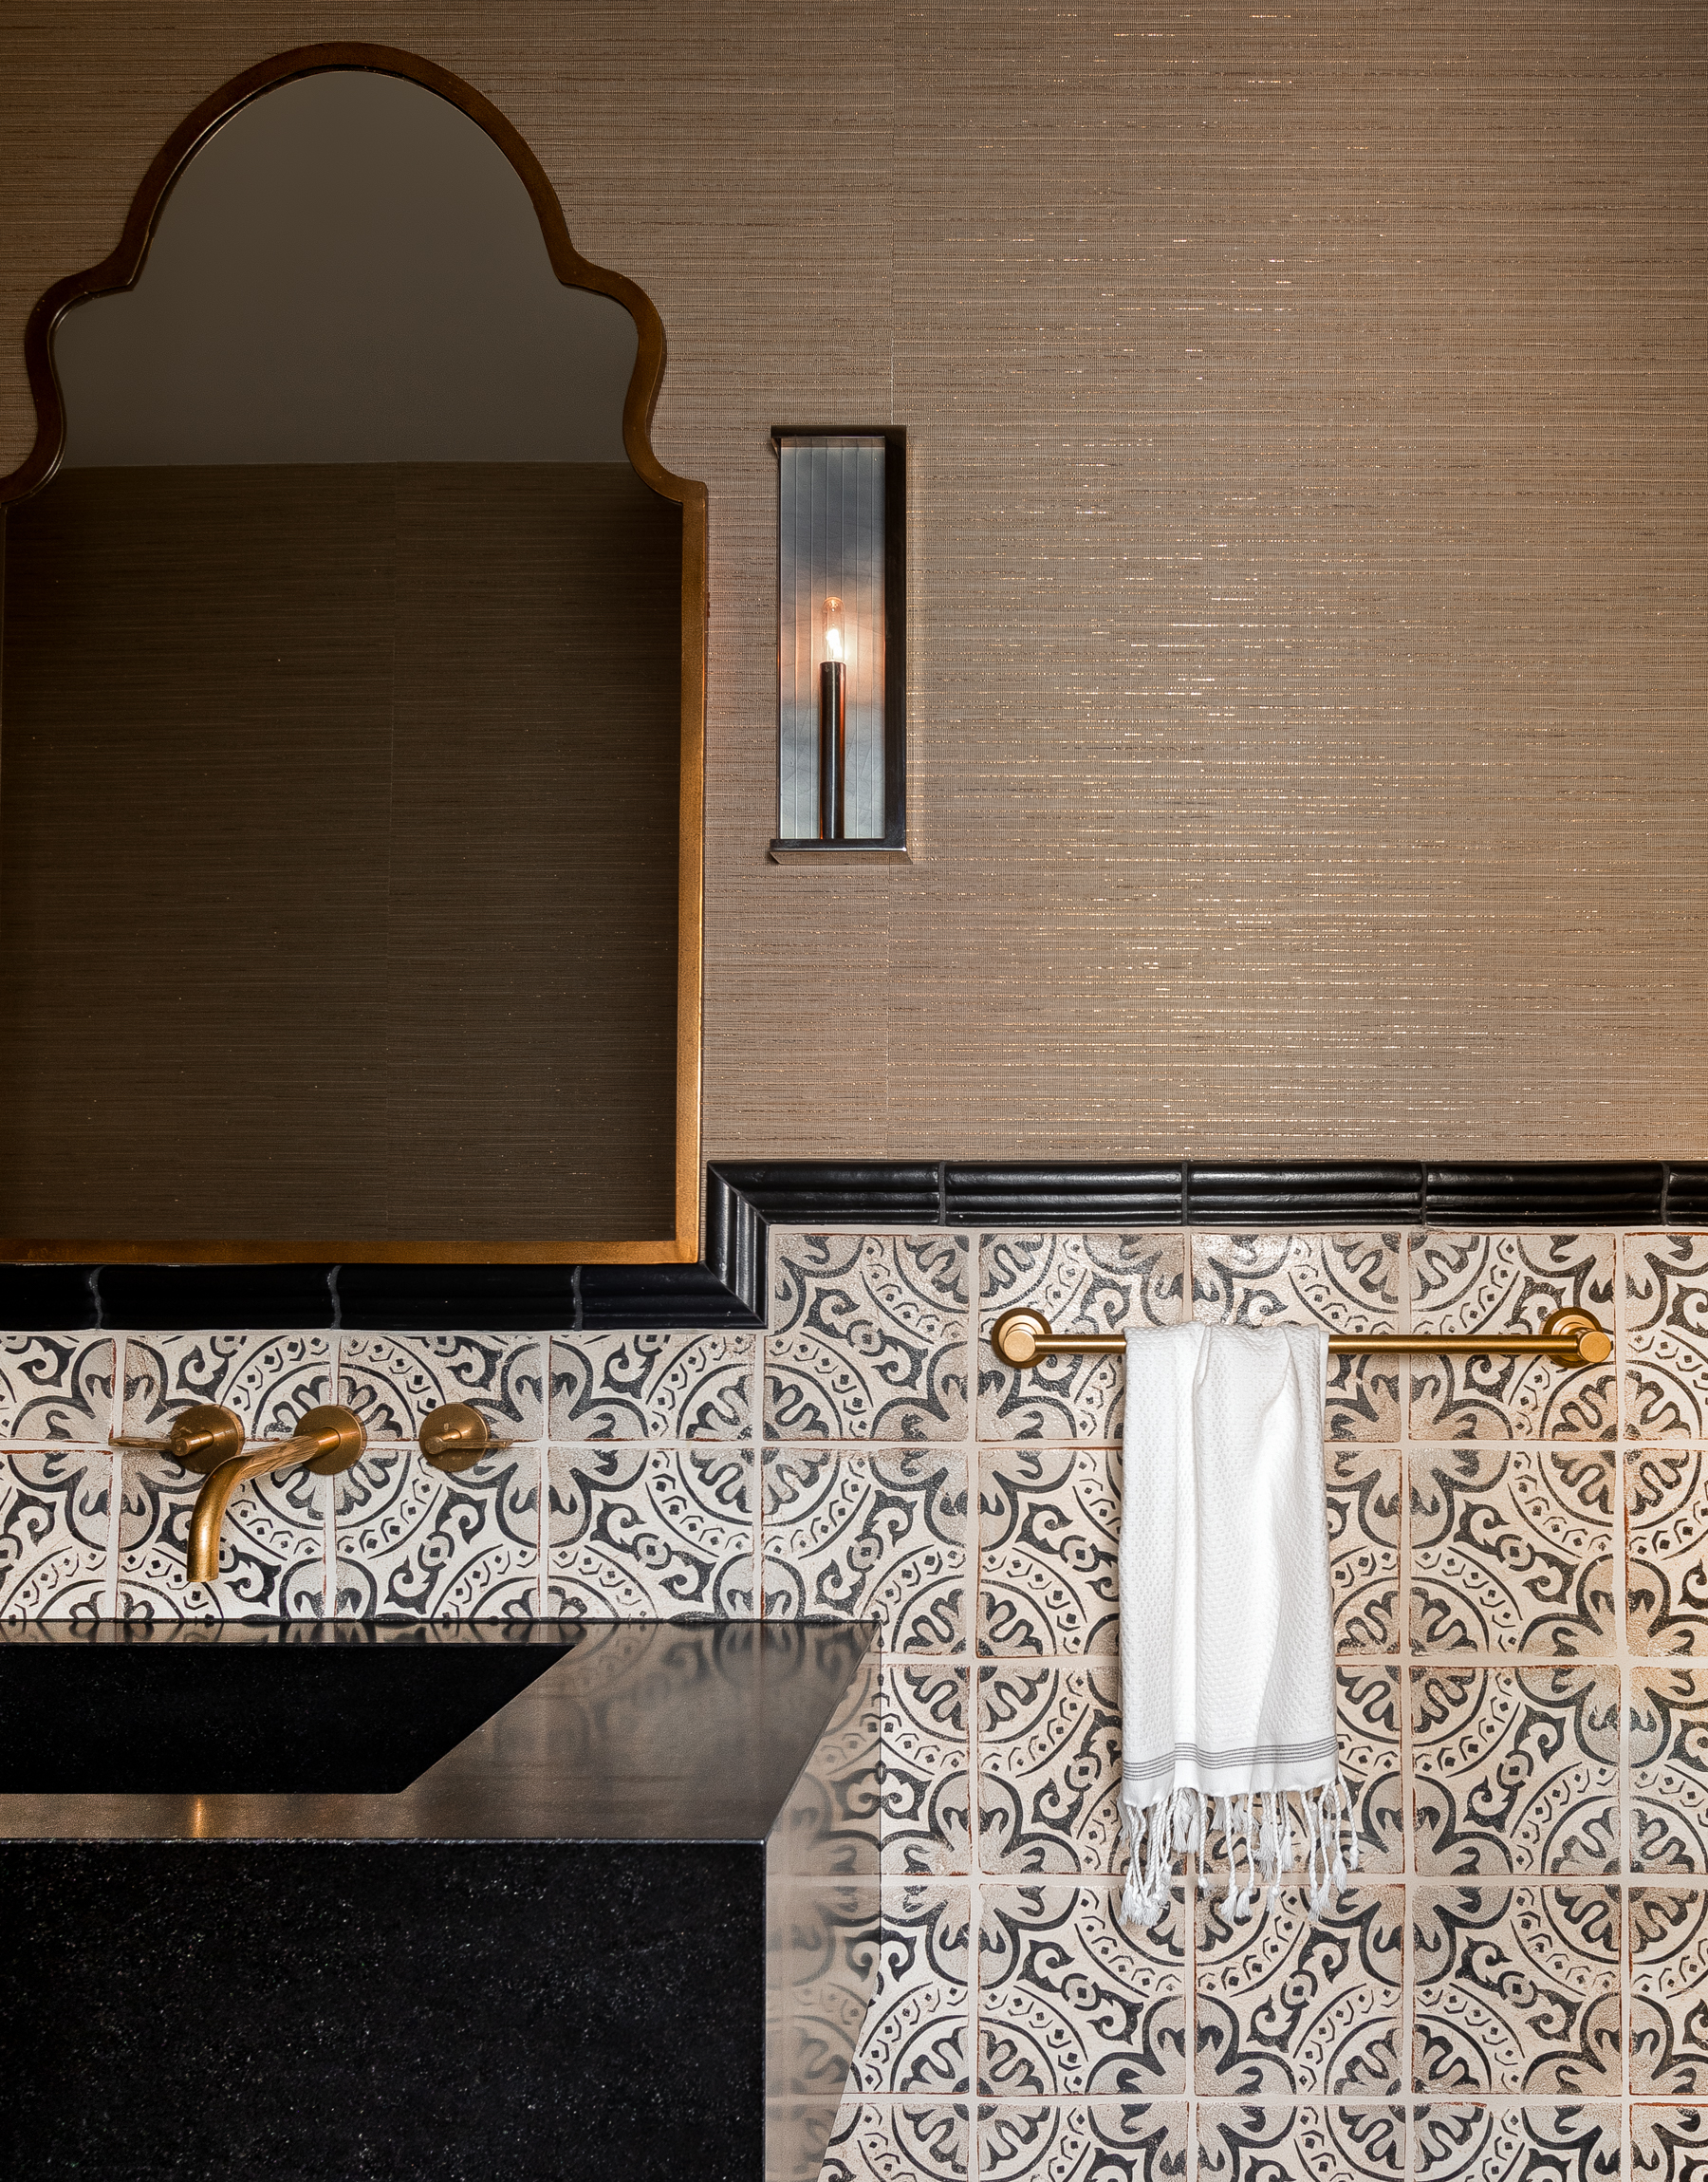 Powder room with Moroccan mirror in metal with antique gilt, Hartmann & Forbes wallcovering, sconces in heirloom finish, and an antique mirror, embodying a Moroccan and masculine aesthetic.